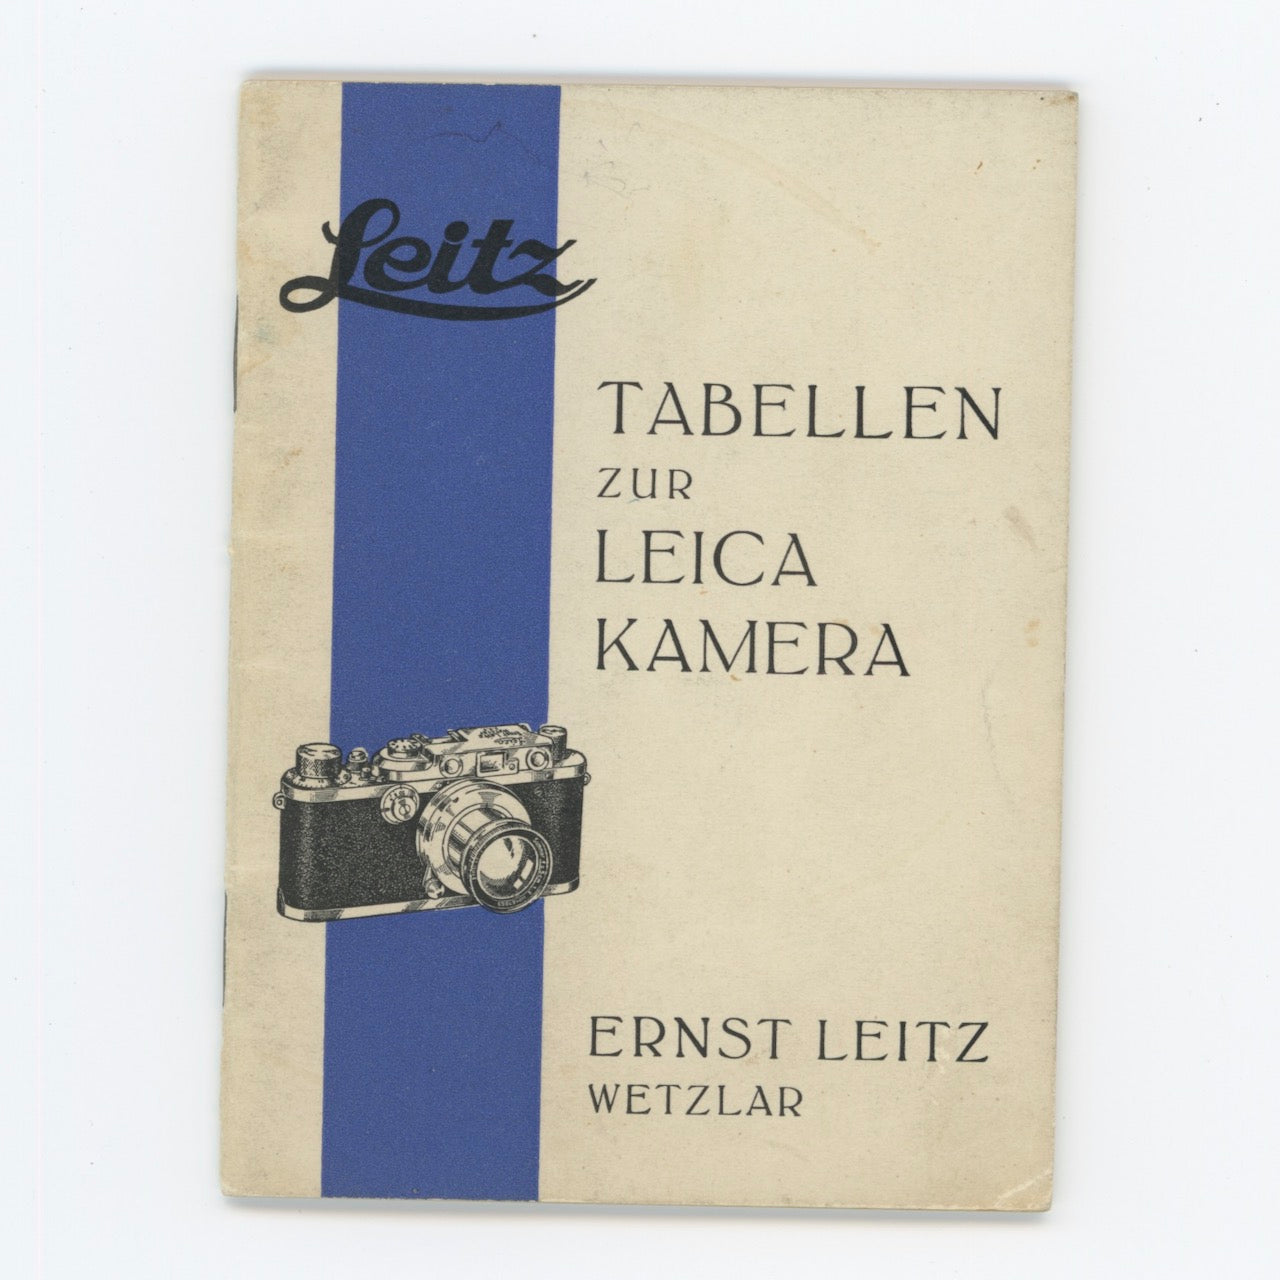 Leitz "Tables for the Leica Camera" Booklet (German).